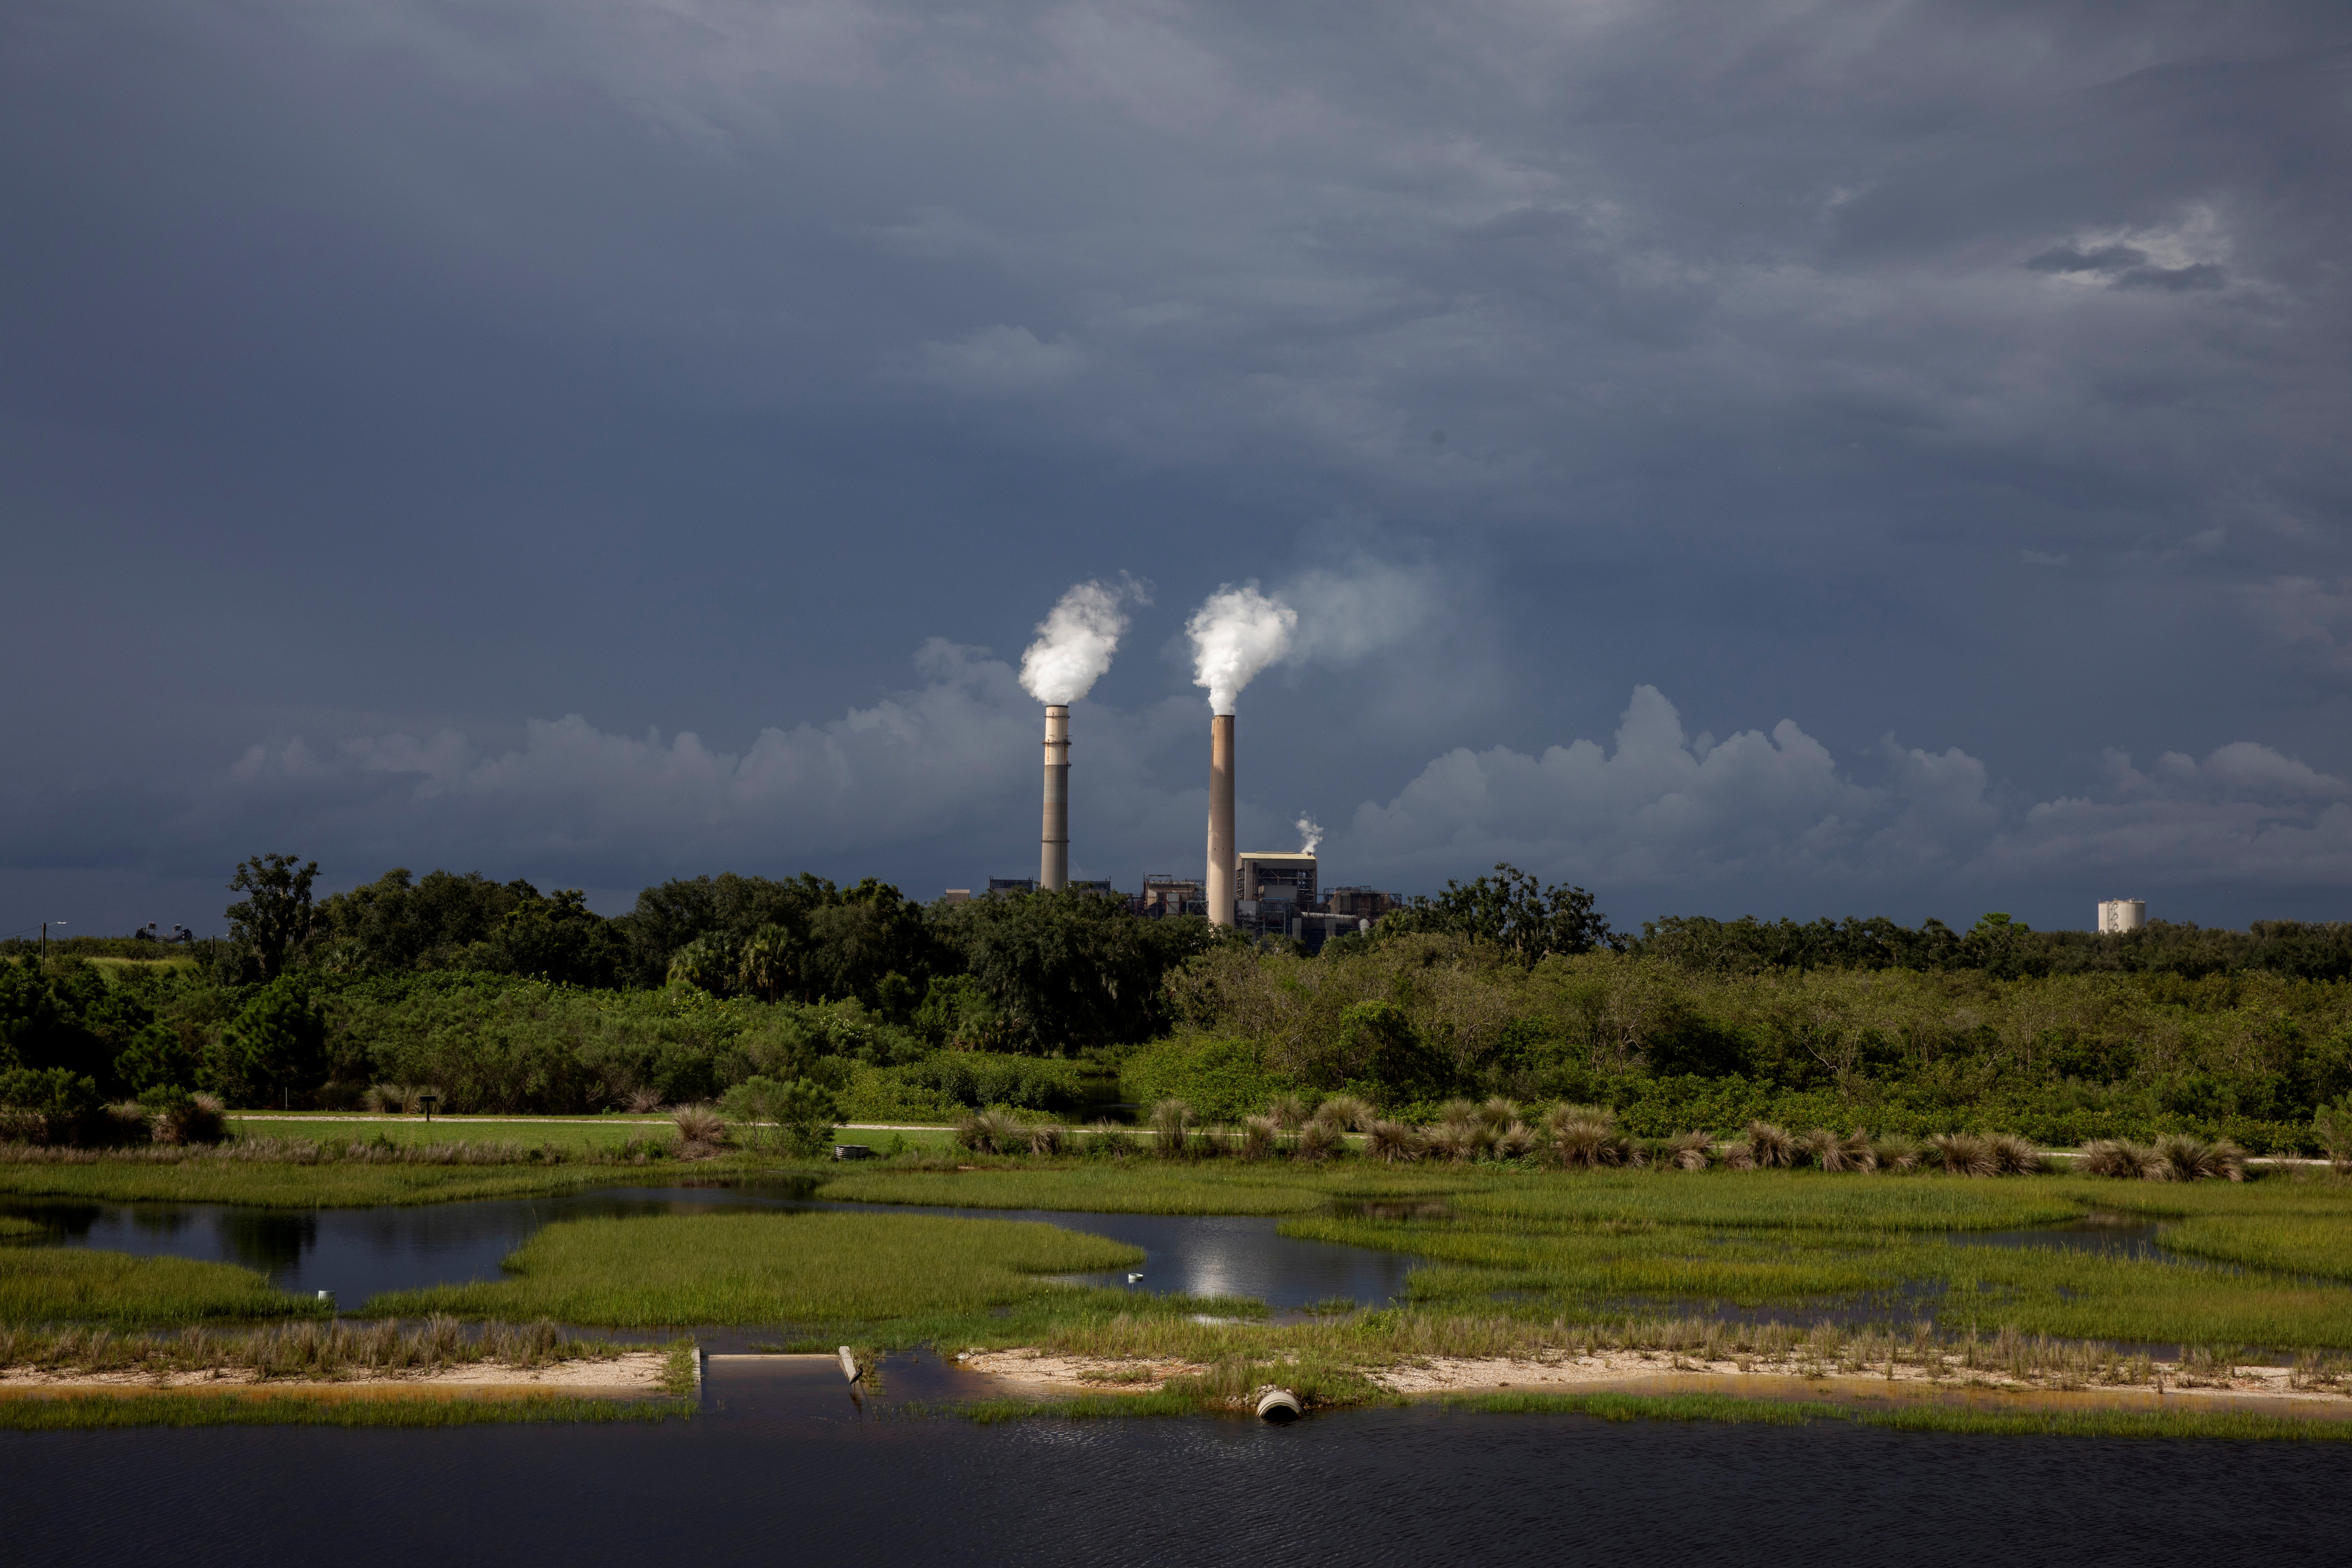 Steam rises out of chimneys at the Big Bend Power Station owned and operated by Tech Energy in Apollo Beach, Florida